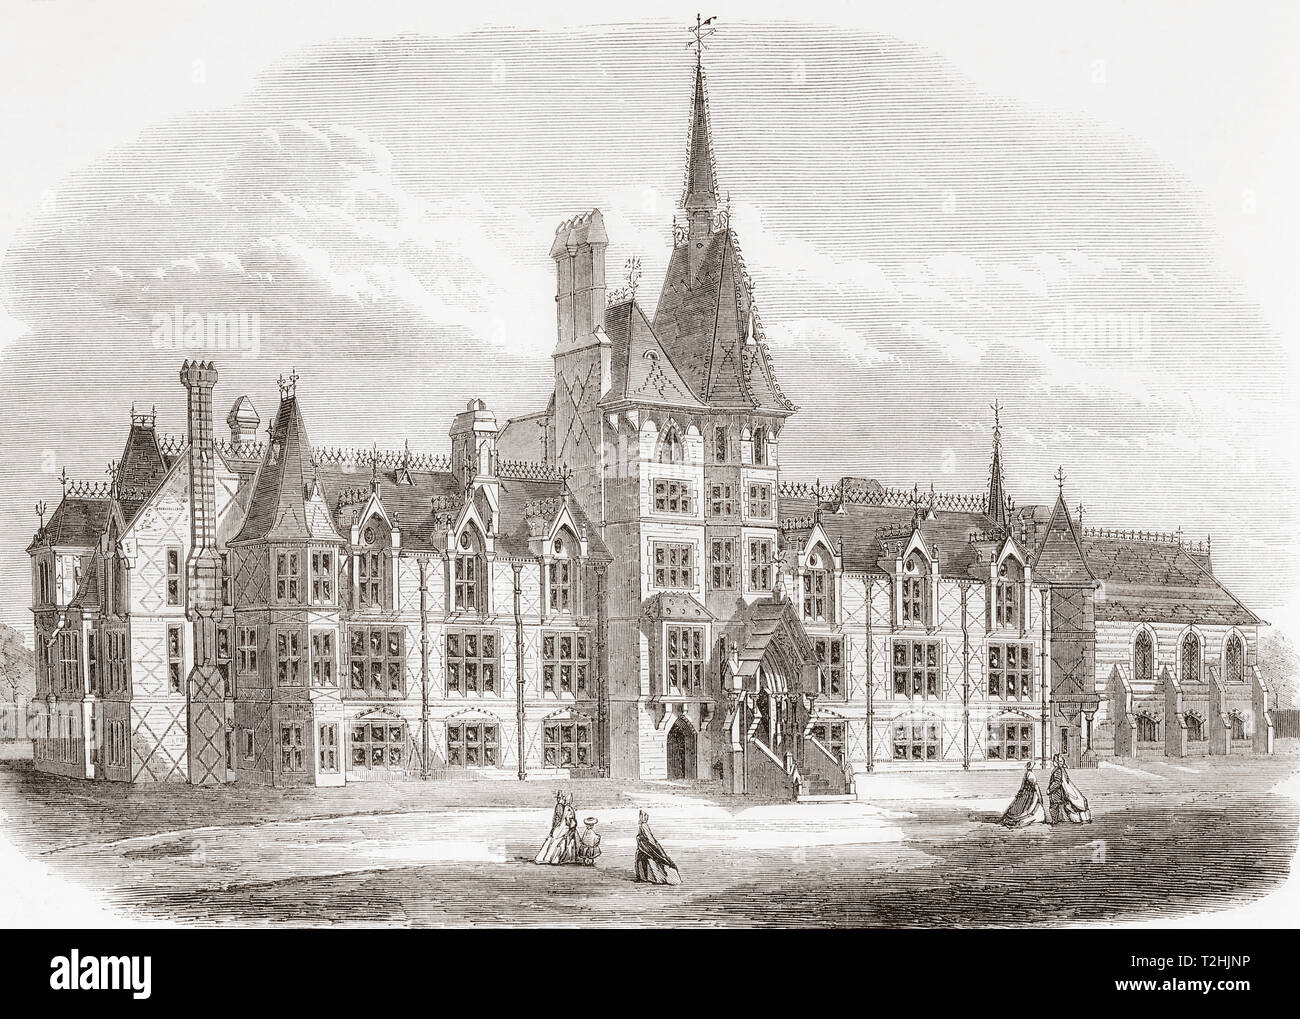 The French Protestant Hospital, (1718 - 1949), Victoria Park, London, England, seen here in its new location, 1865.  This hospital was established as an almshouse for the relief of poor, distressed Huguenots.  From The Illustrated London News, published 1865. Stock Photo